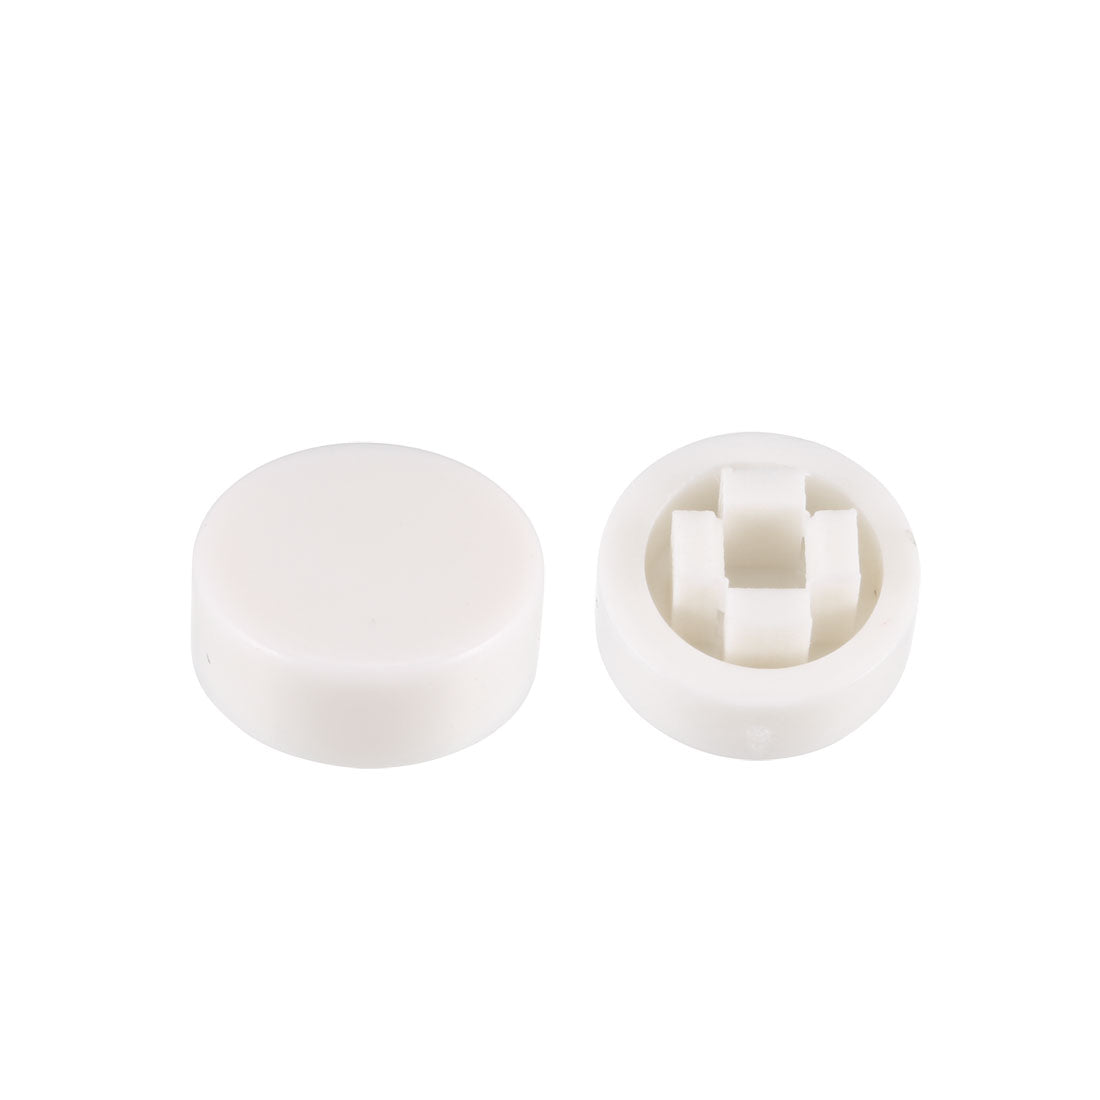 uxcell Uxcell 20Pcs Plastic Pushbutton Tactile Switch Caps Cover Keycaps White for 6x6x7.3mm Tact Switch